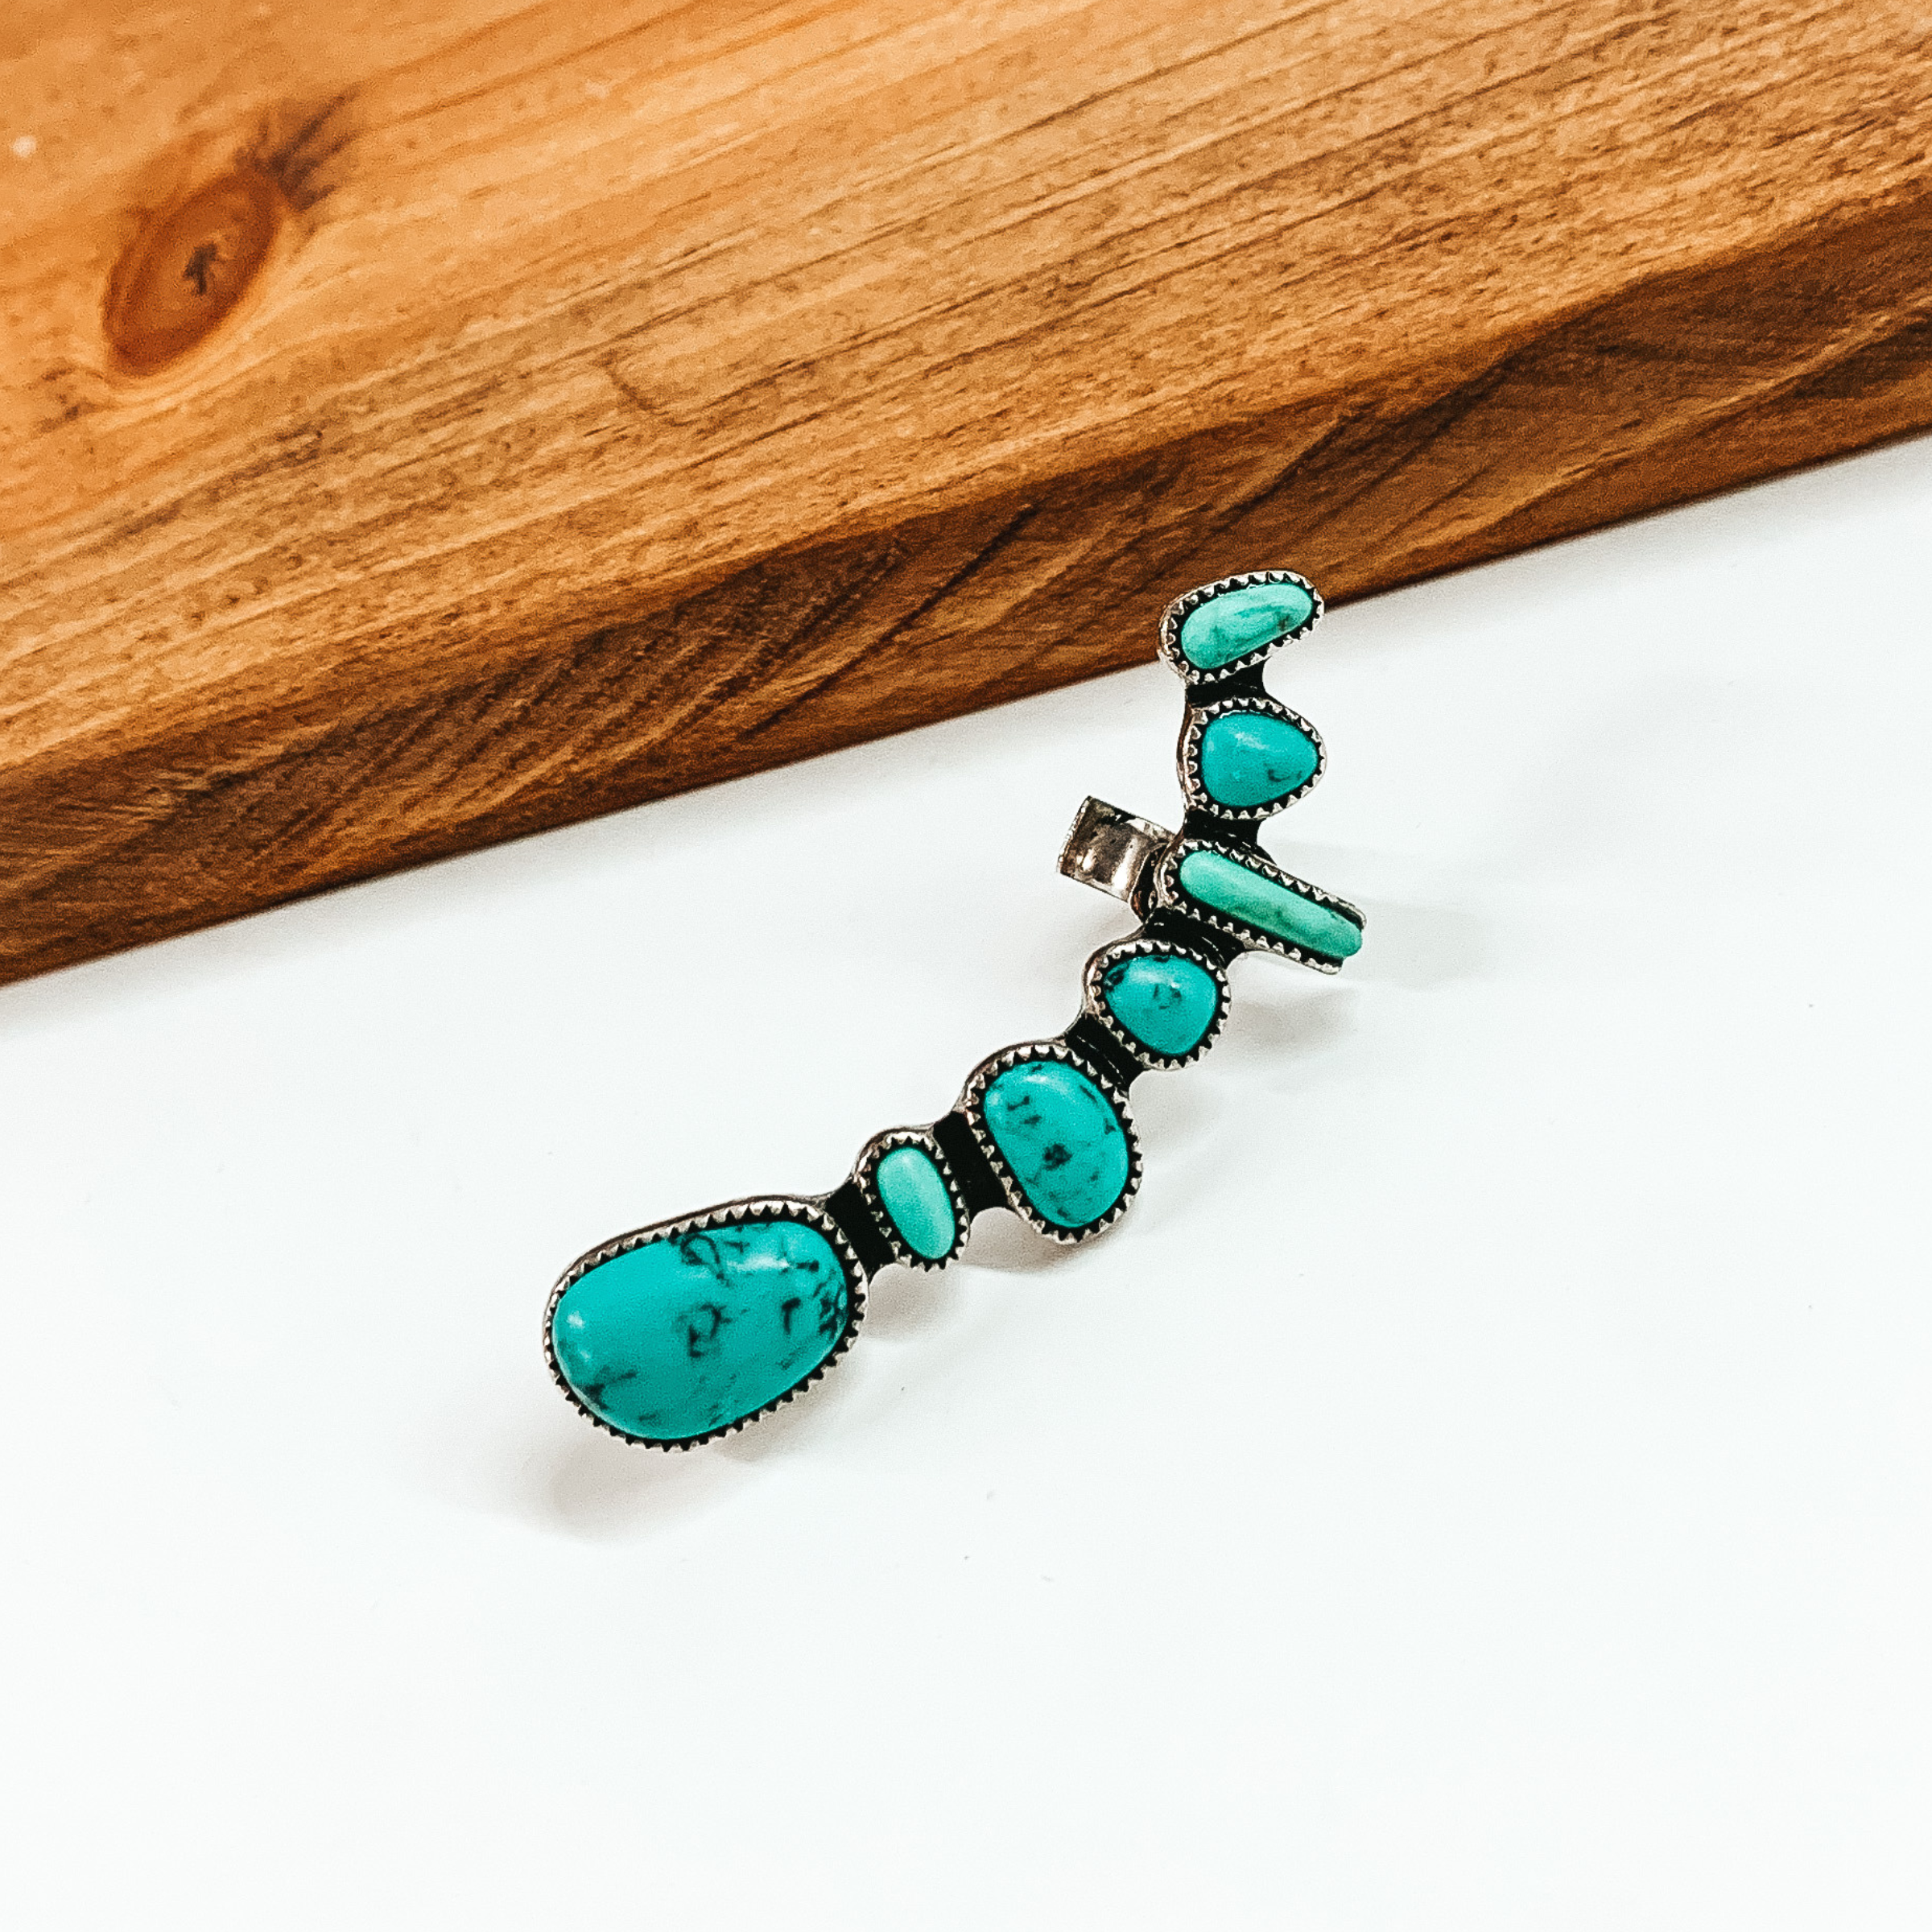 Out of Line Silver Tone Earring Cuff with Faux Stones in Turquoise - Giddy Up Glamour Boutique